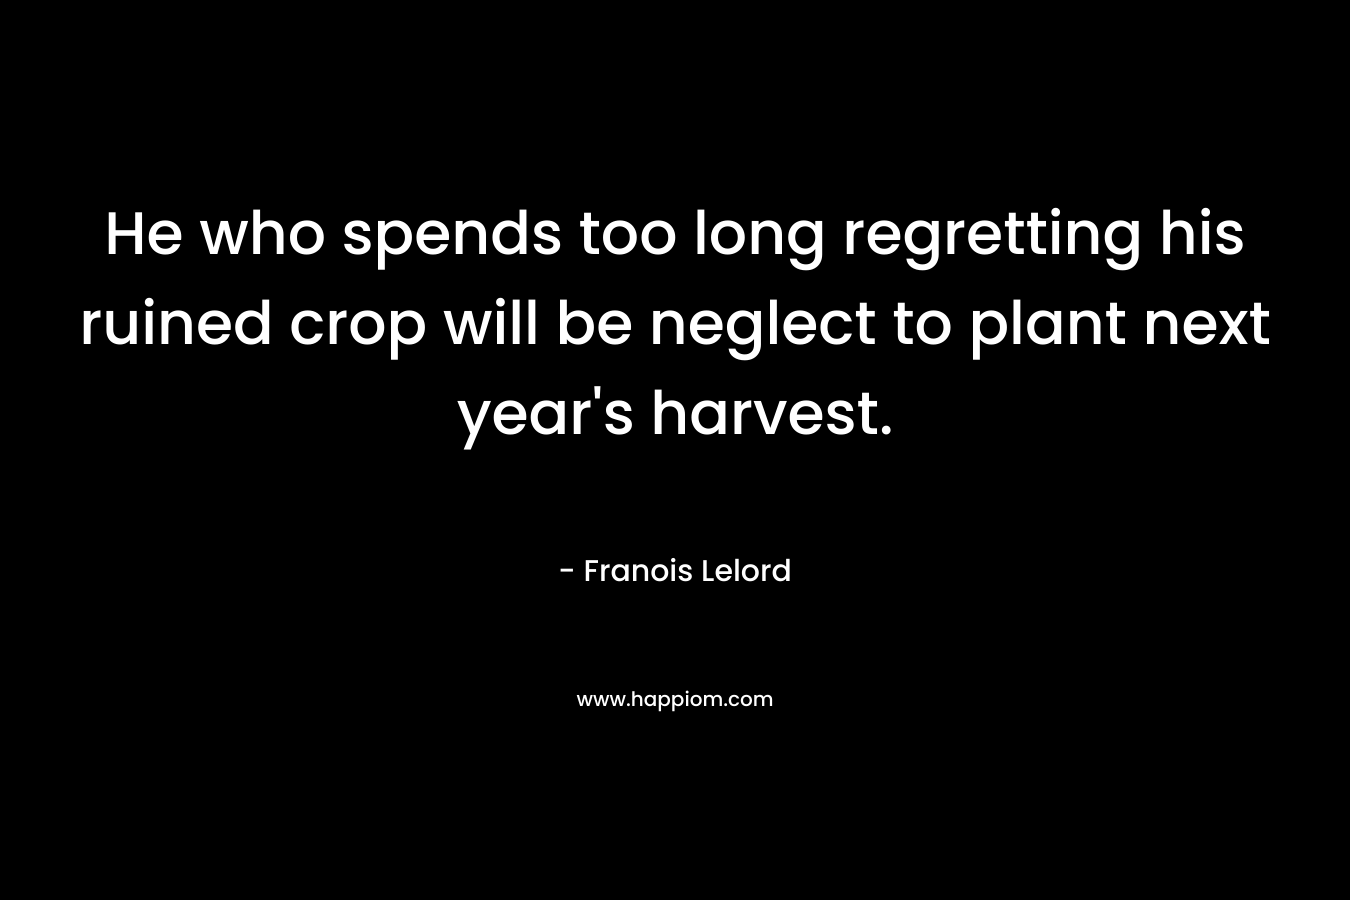 He who spends too long regretting his ruined crop will be neglect to plant next year’s harvest. – Franois Lelord